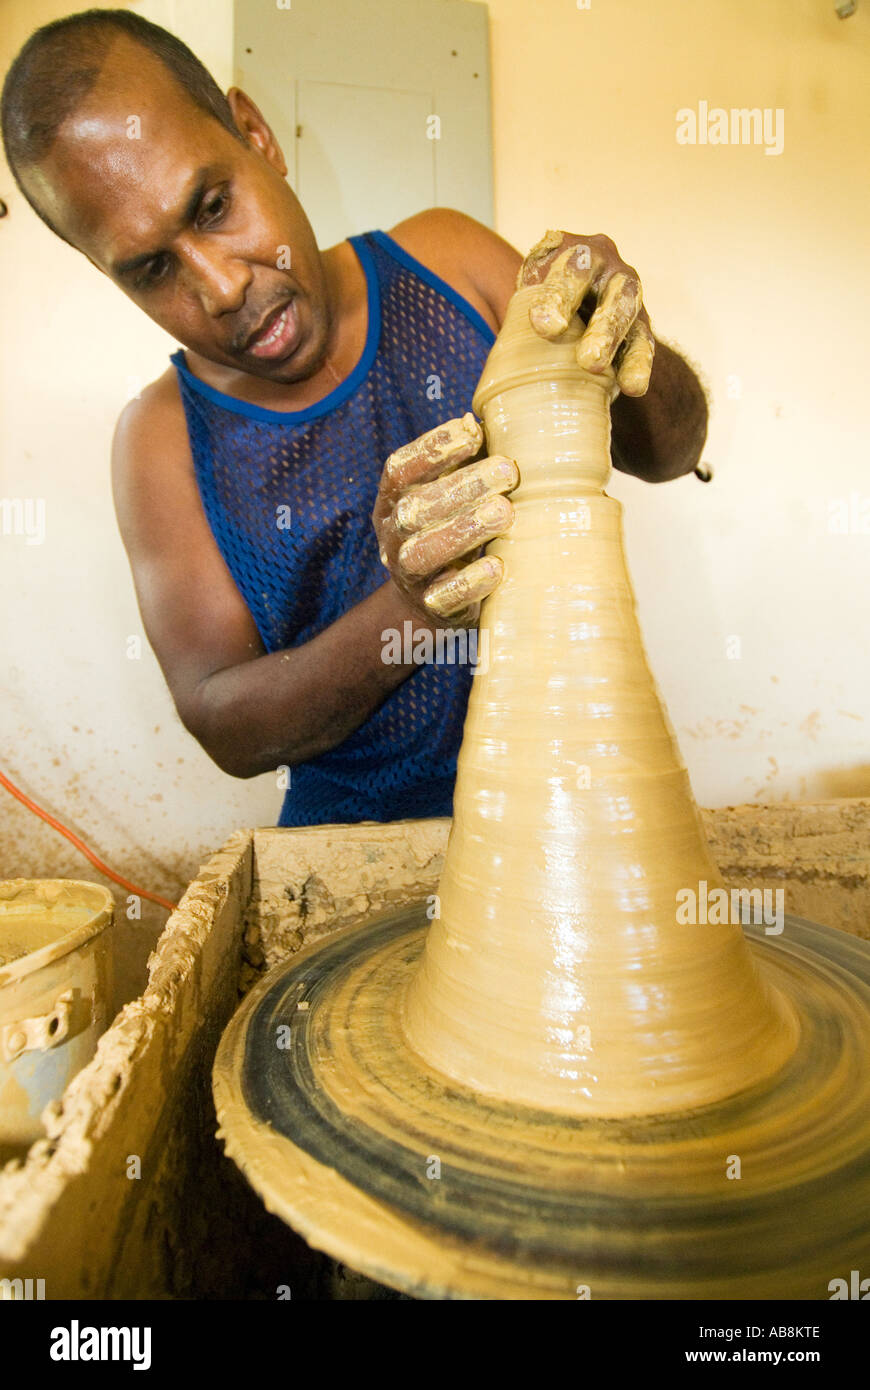 West Indies Trinidad Port of Spain Radikas Clay Pottery Shop Potter forming clay cup on Pottery wheel Stock Photo